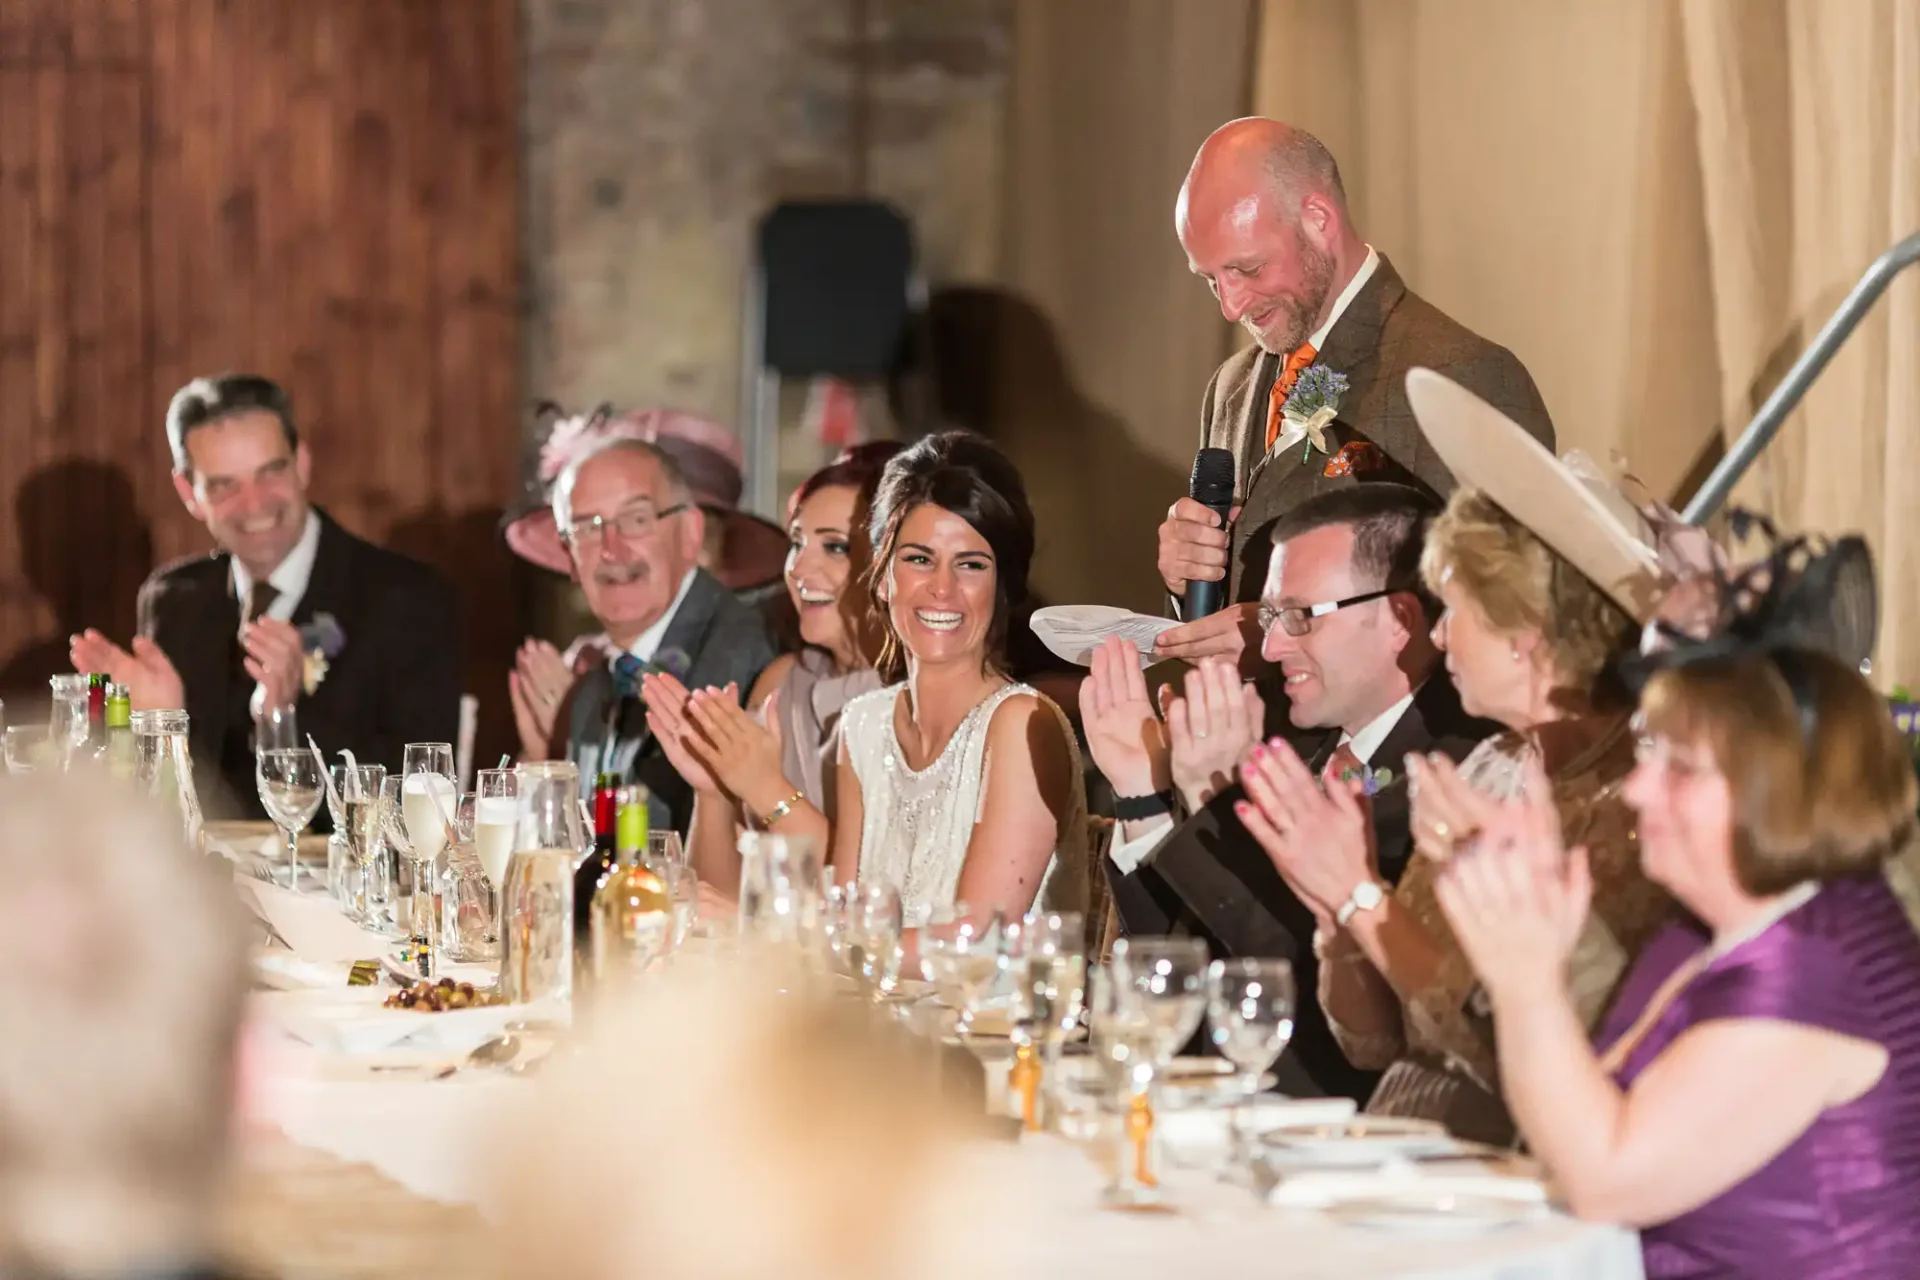 A joyful wedding reception scene with guests clapping as a bald man shares a laugh, while a woman beside him smiles widely at a festively decorated table.